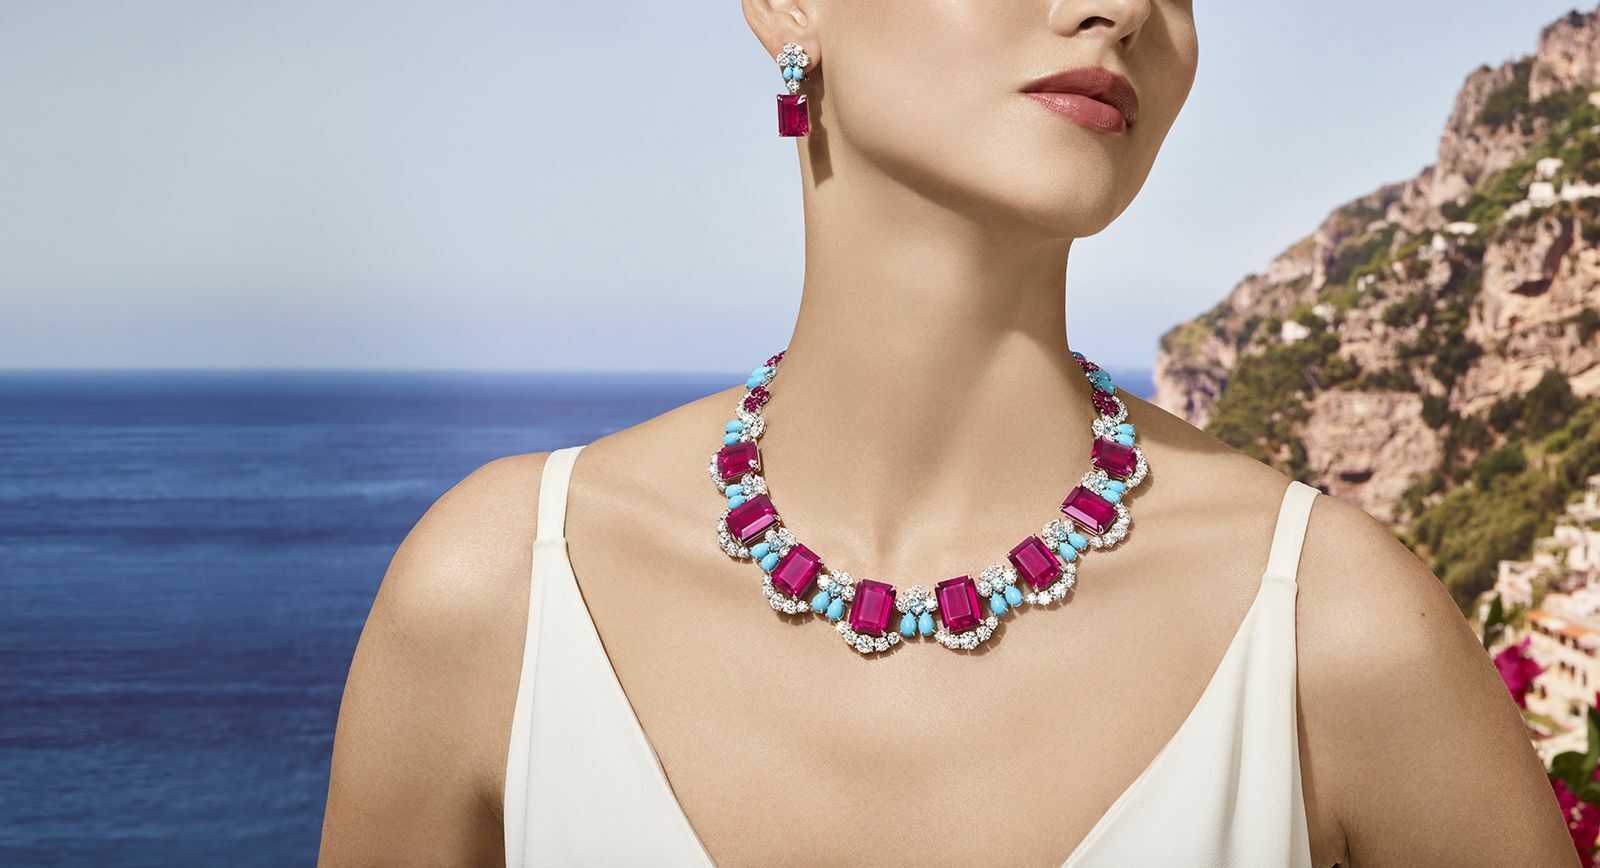 Harry Winston Bougainvillea necklace with 144.14 carats of rubellite tourmaline, Paraiba tourmaline, turquoise and diamonds from the Majestic Escapes High Jewellery collection